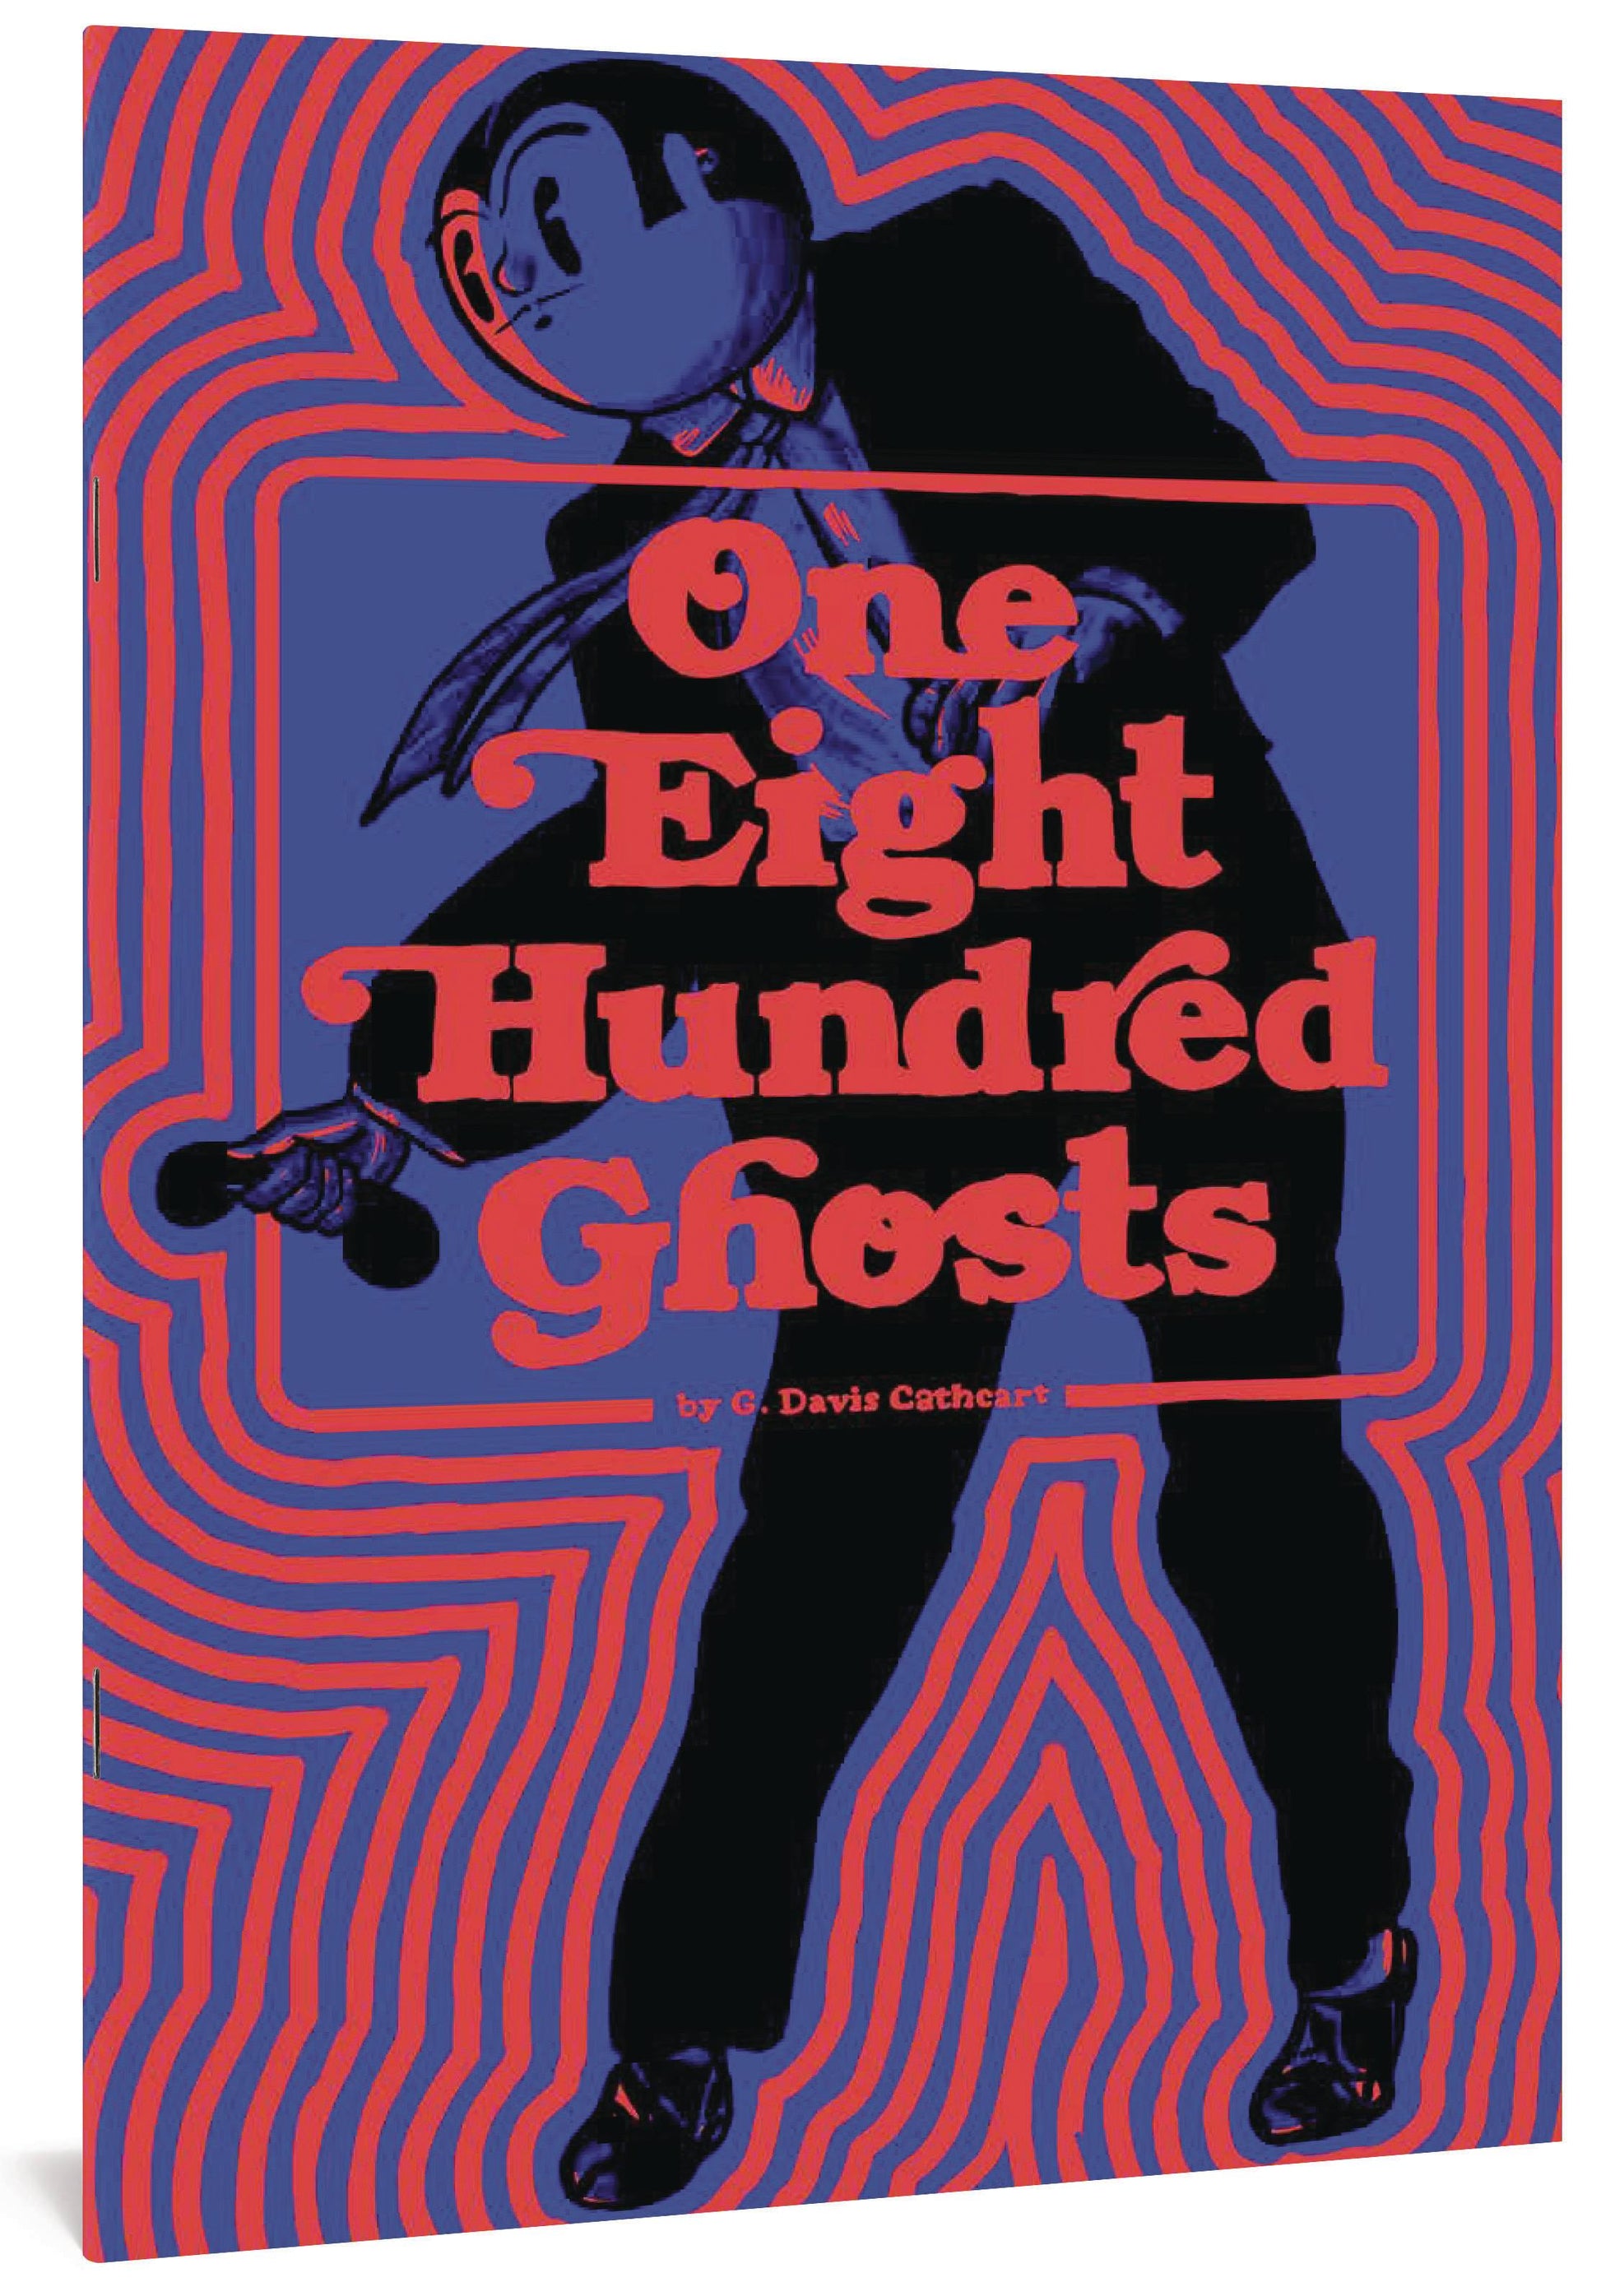 The One Stop Shop Comics & Games Fantagraphics Underground One Eight Hundred Ghosts Tp (C: 0- (05/25/2022) FANTAGRAPHICS BOOKS